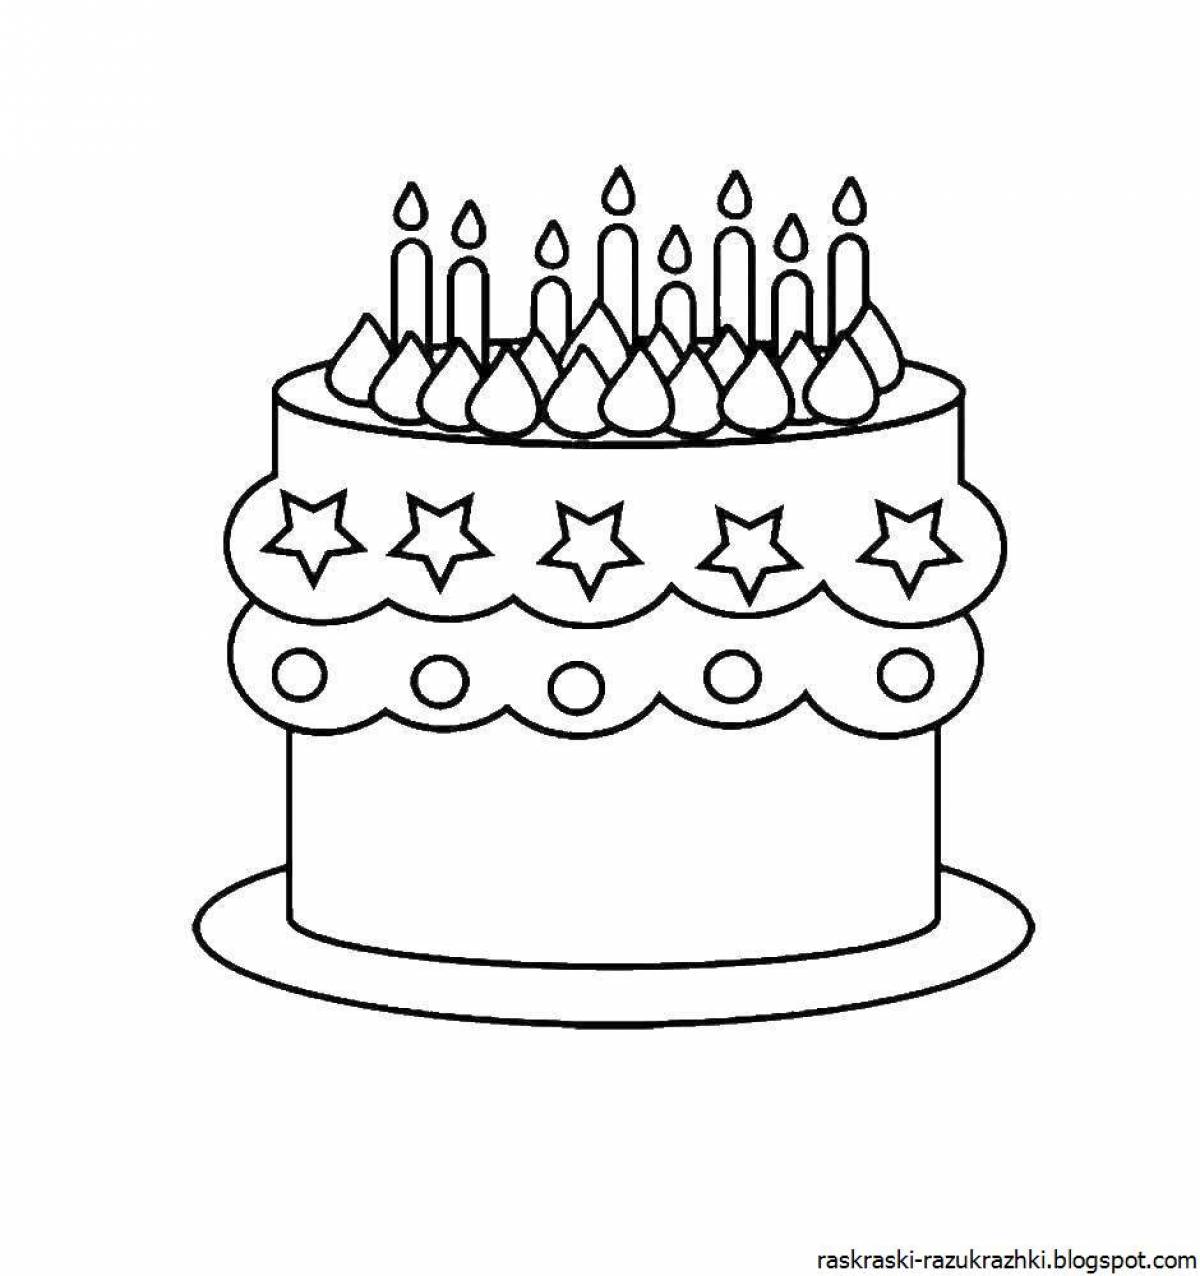 Delicious cakes coloring pages for kids